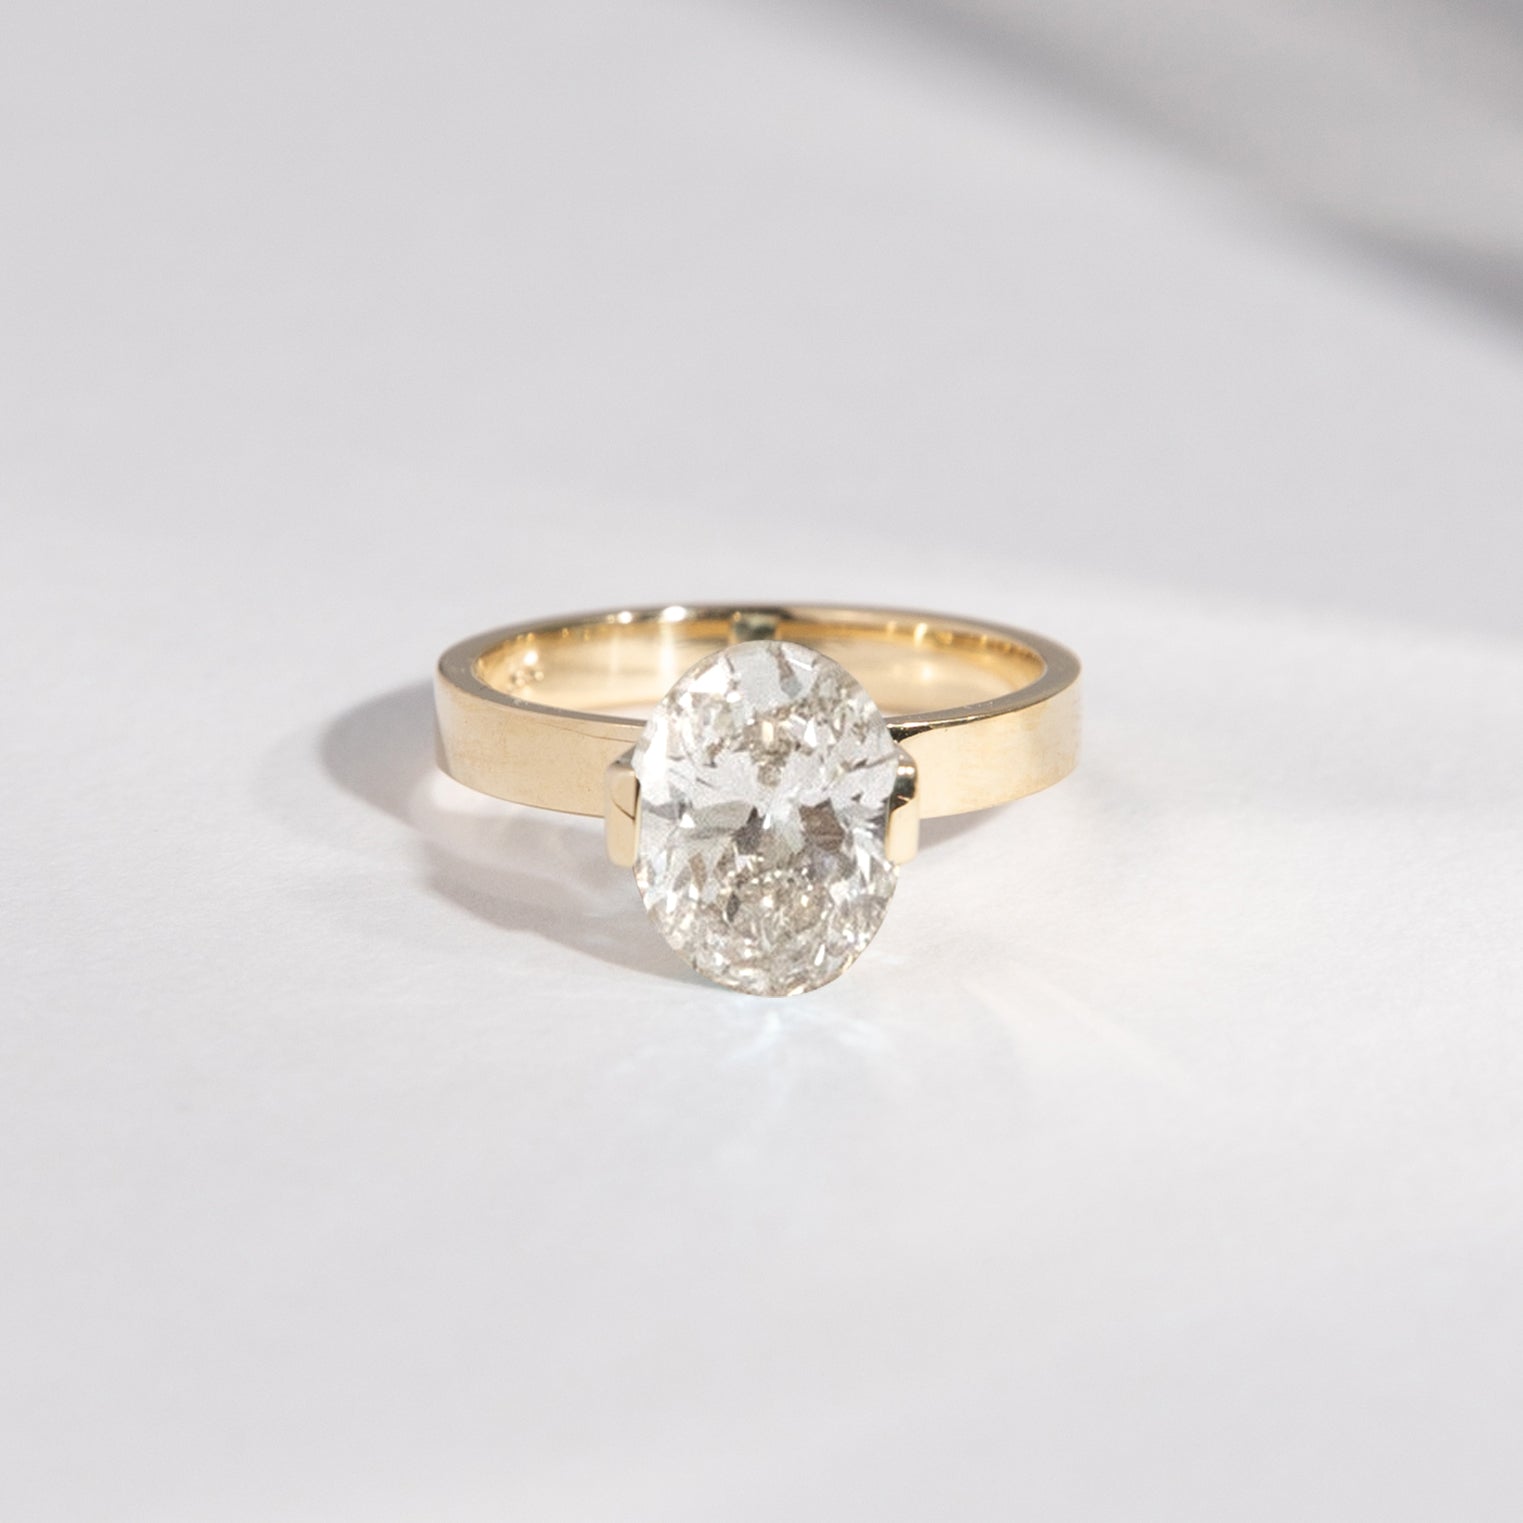 Silva Designer Ring in 14k Gold set with an oval brilliant cut lab-grown diamond By SHW Fine Jewelry NYC